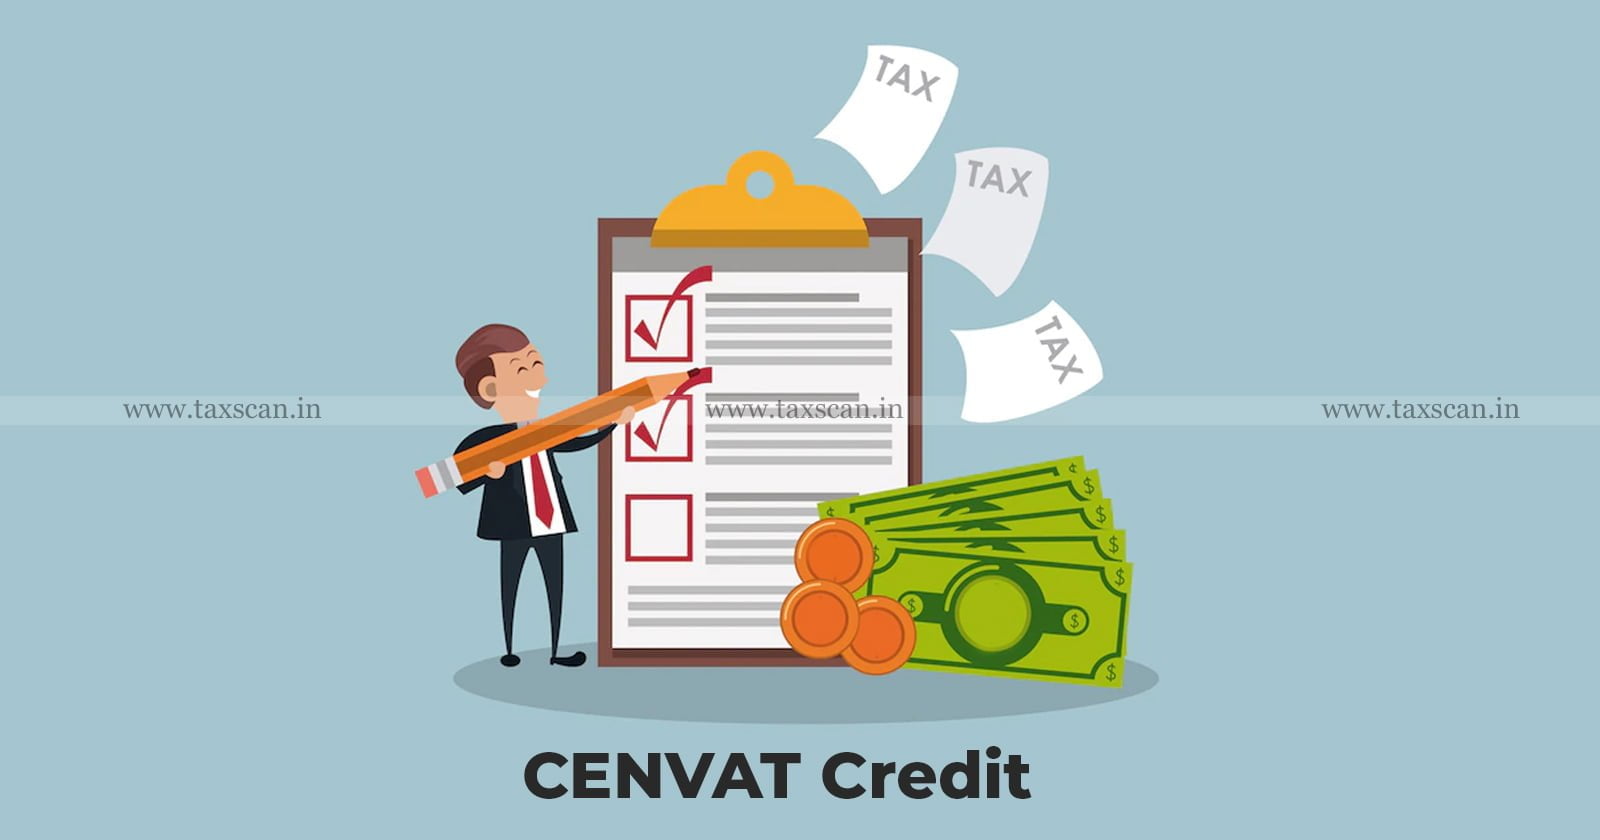 CENVAT -credit - Service- Tax- paid - Invoices - Service- Policy - CESTAT - CENVAT- credit-TAXSCAN